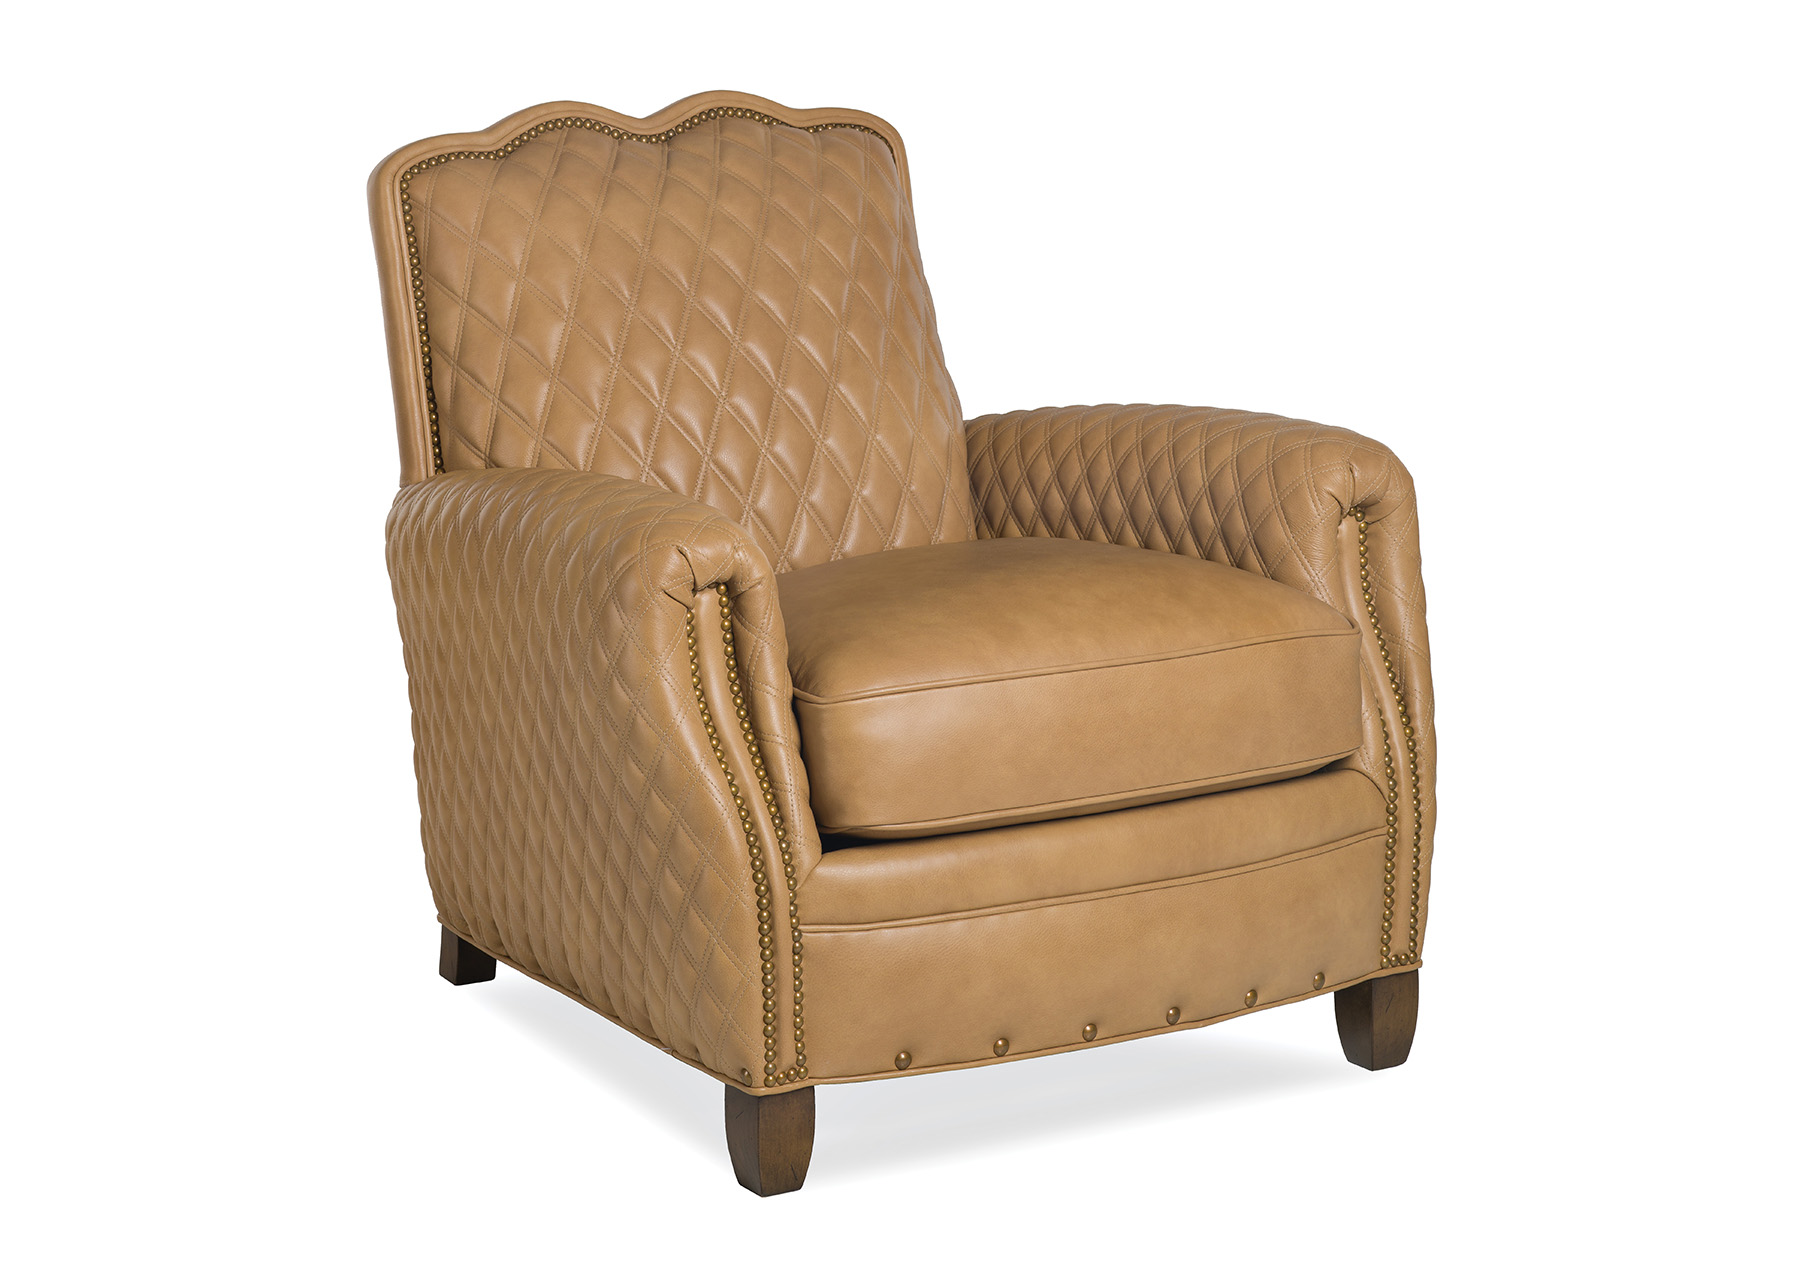 UTOPIA QUILTED CHAIR